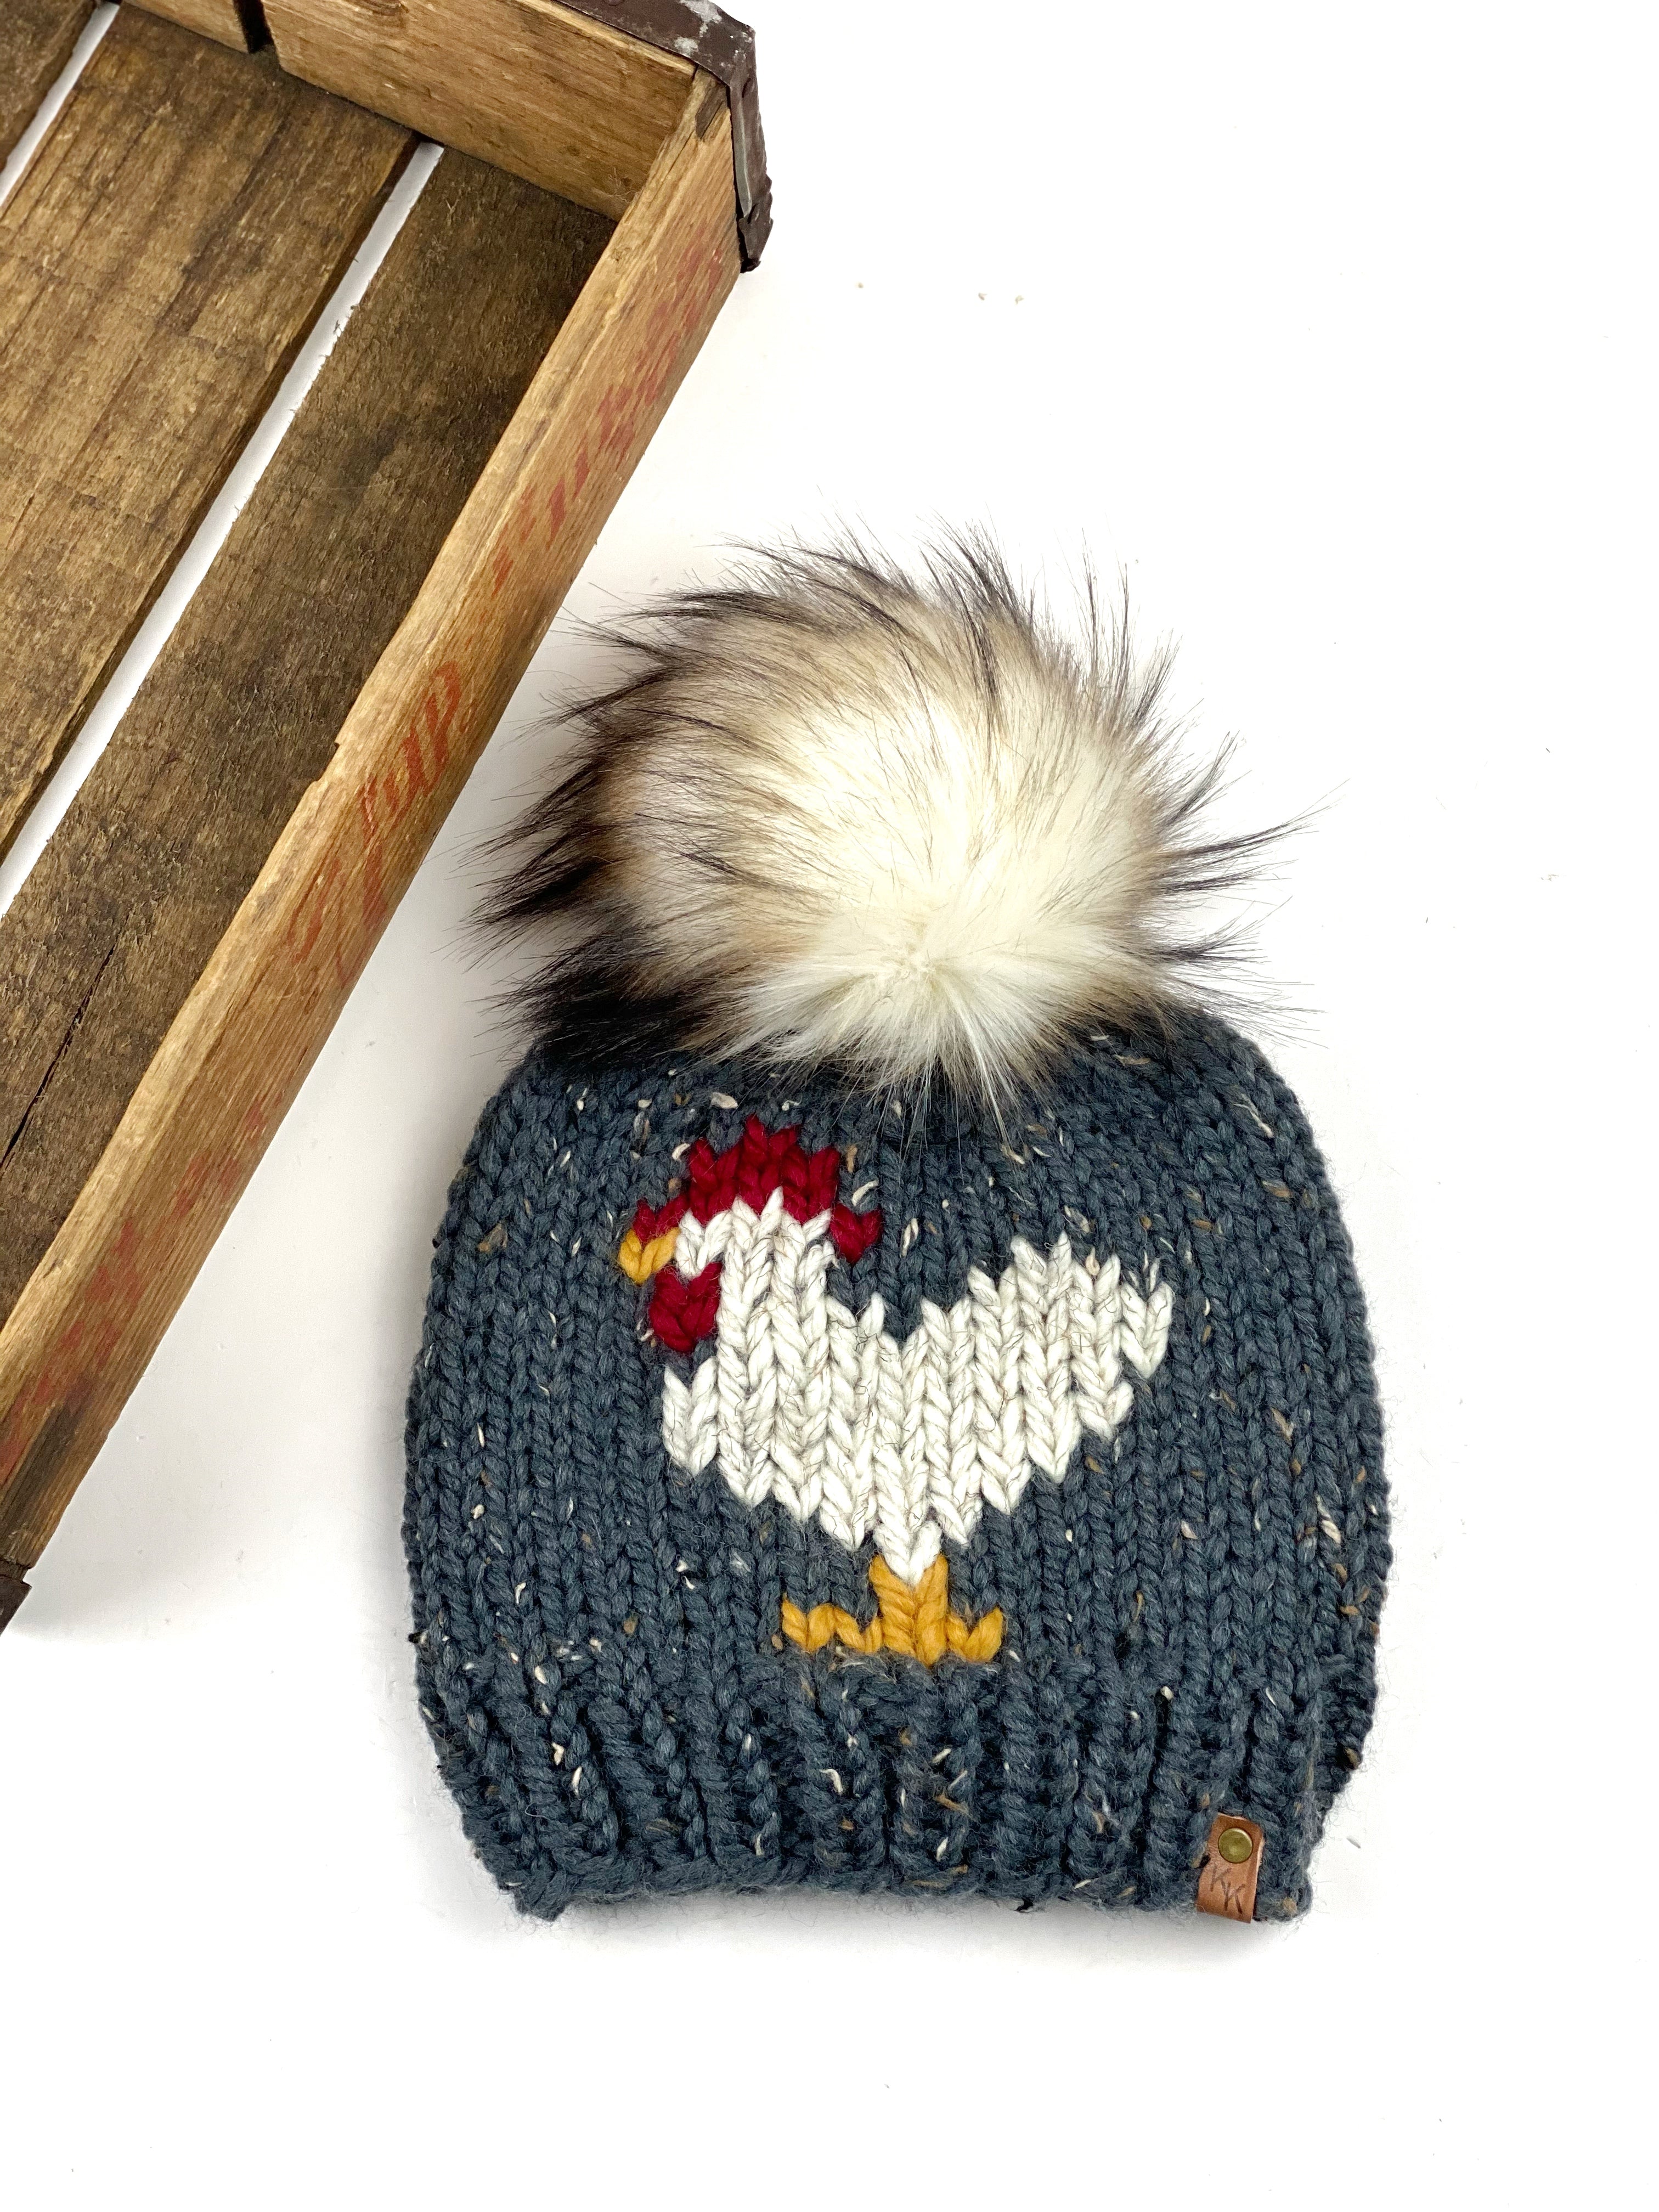 KNIT Chicken Hat PATTERN Only Knit Instructions Downloadable PDF File